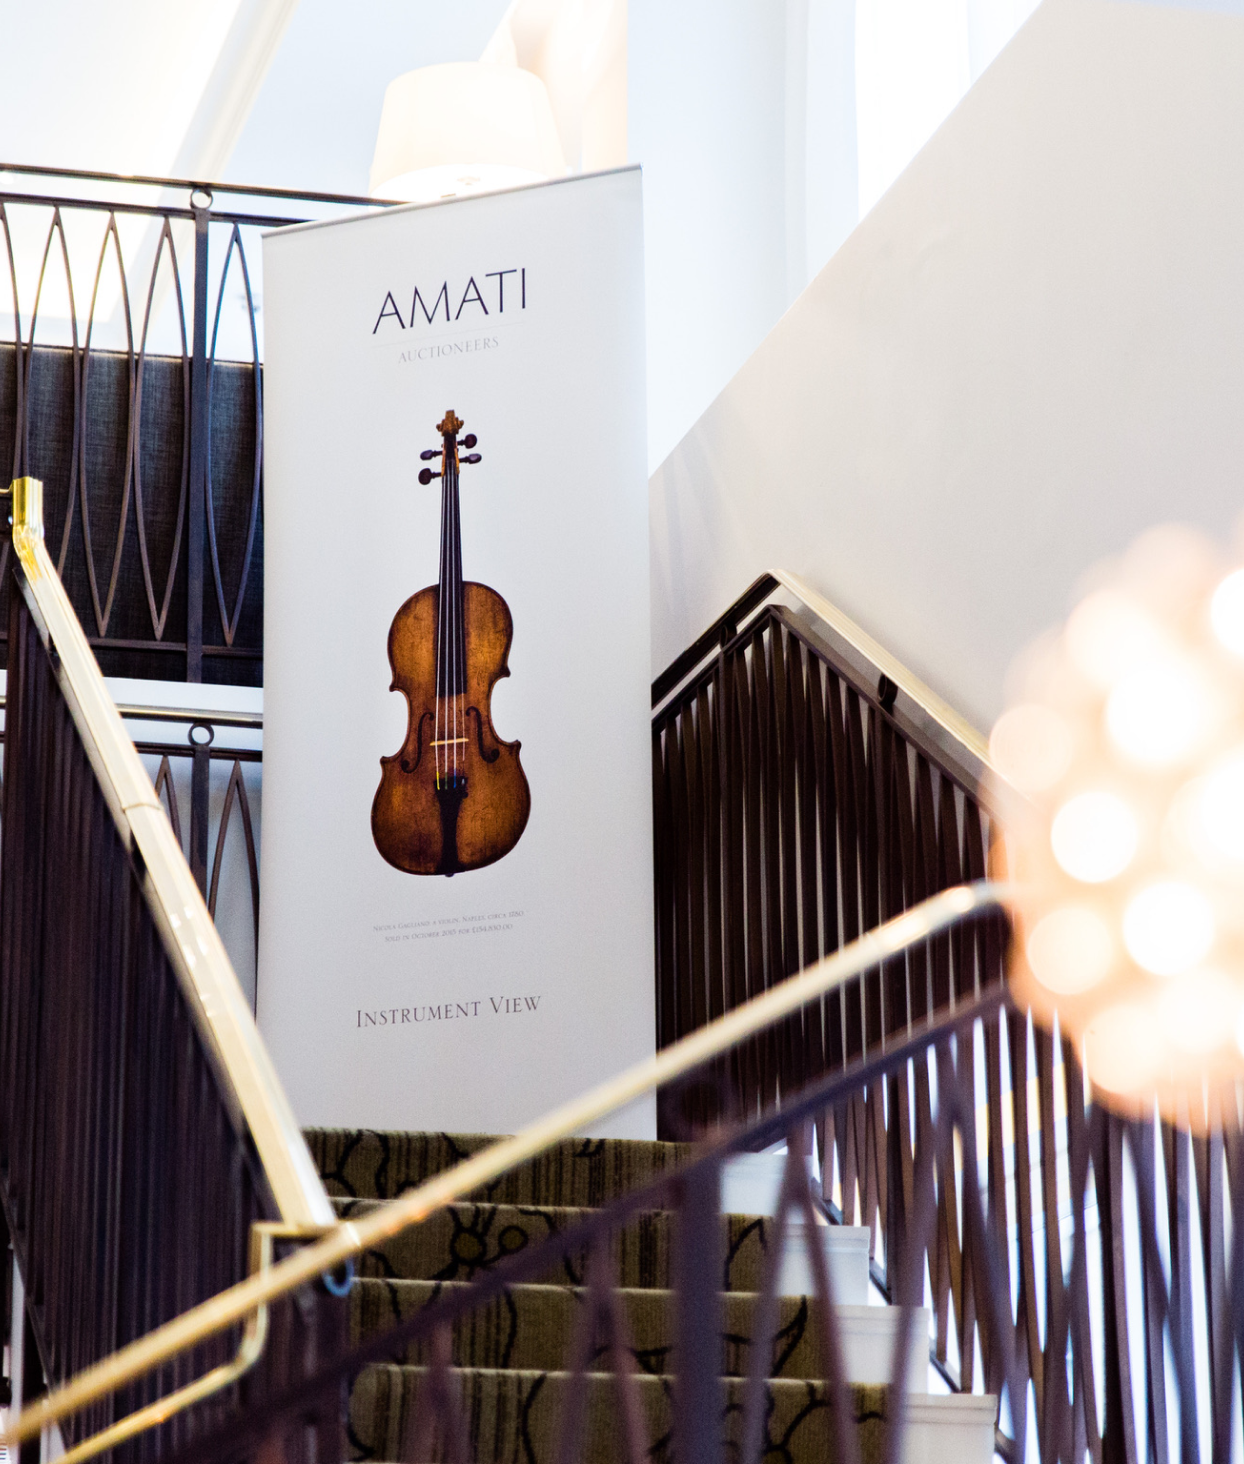 Amati is an online auction house specialising in the sale of stringed musical instruments.